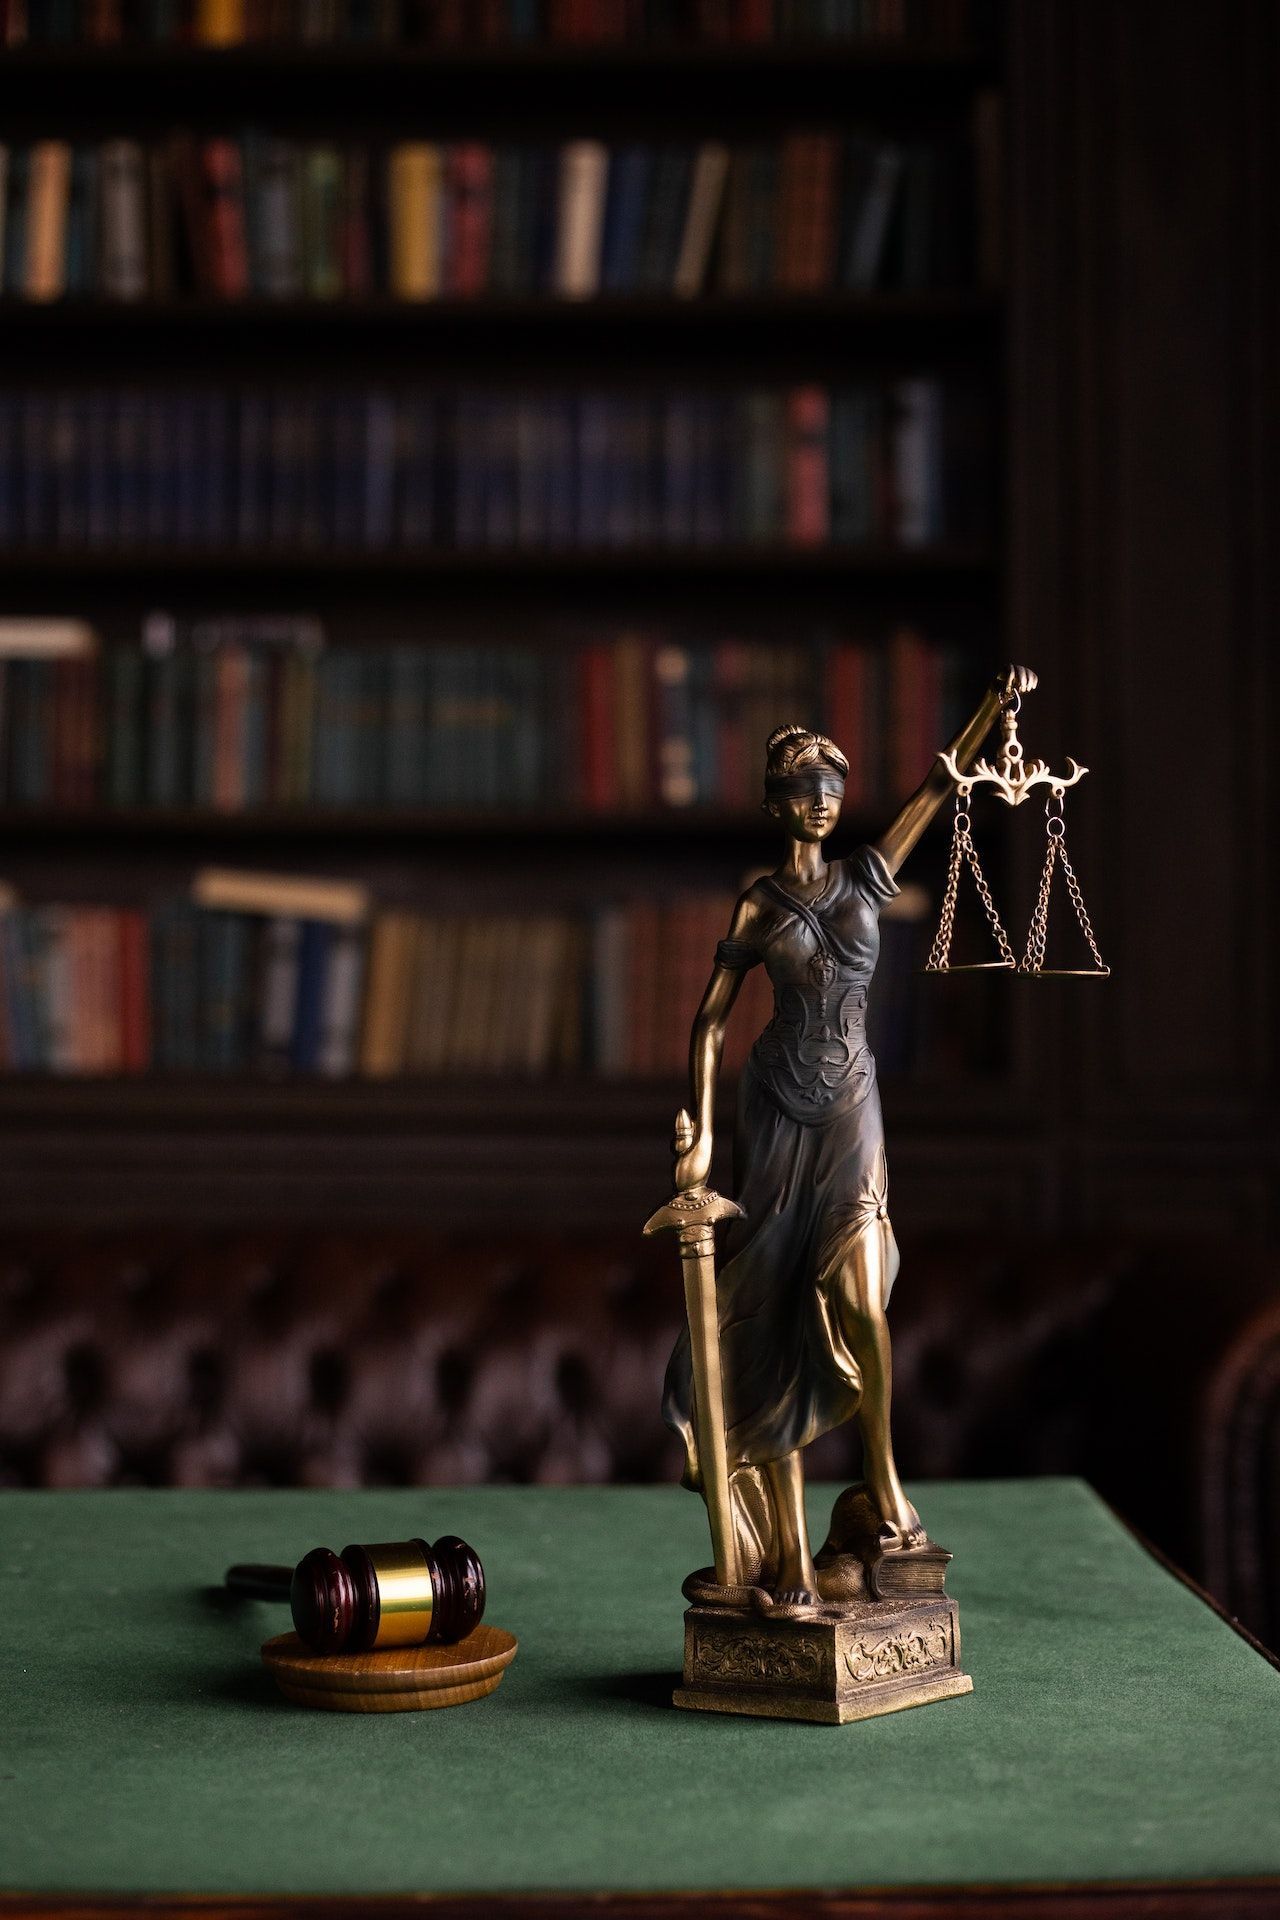 justice scale figurine next to a gavel on a desk